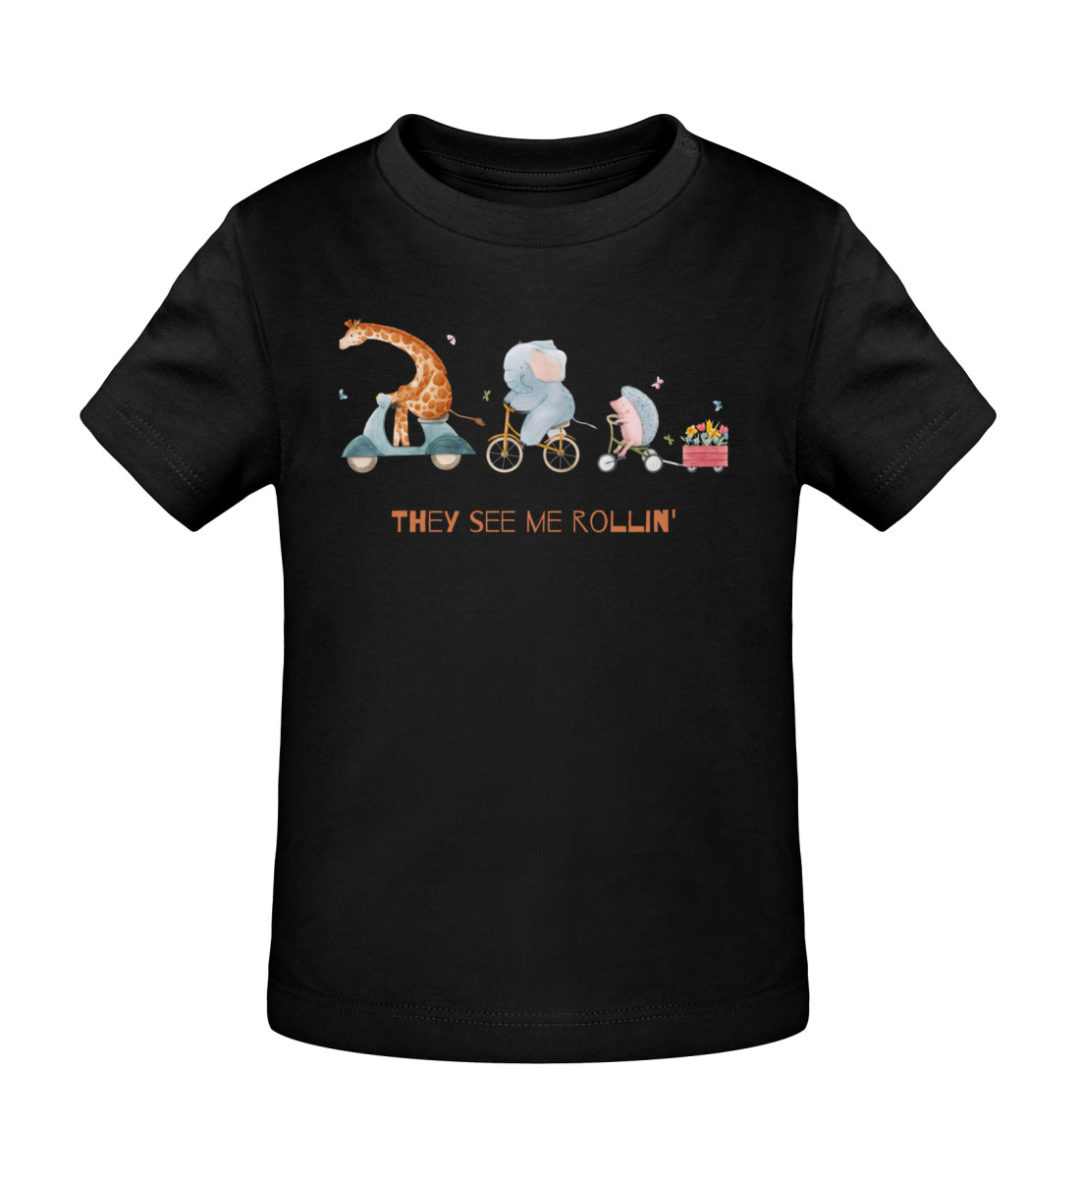 They see me rollin- - Baby Creator T-Shirt ST/ST-16